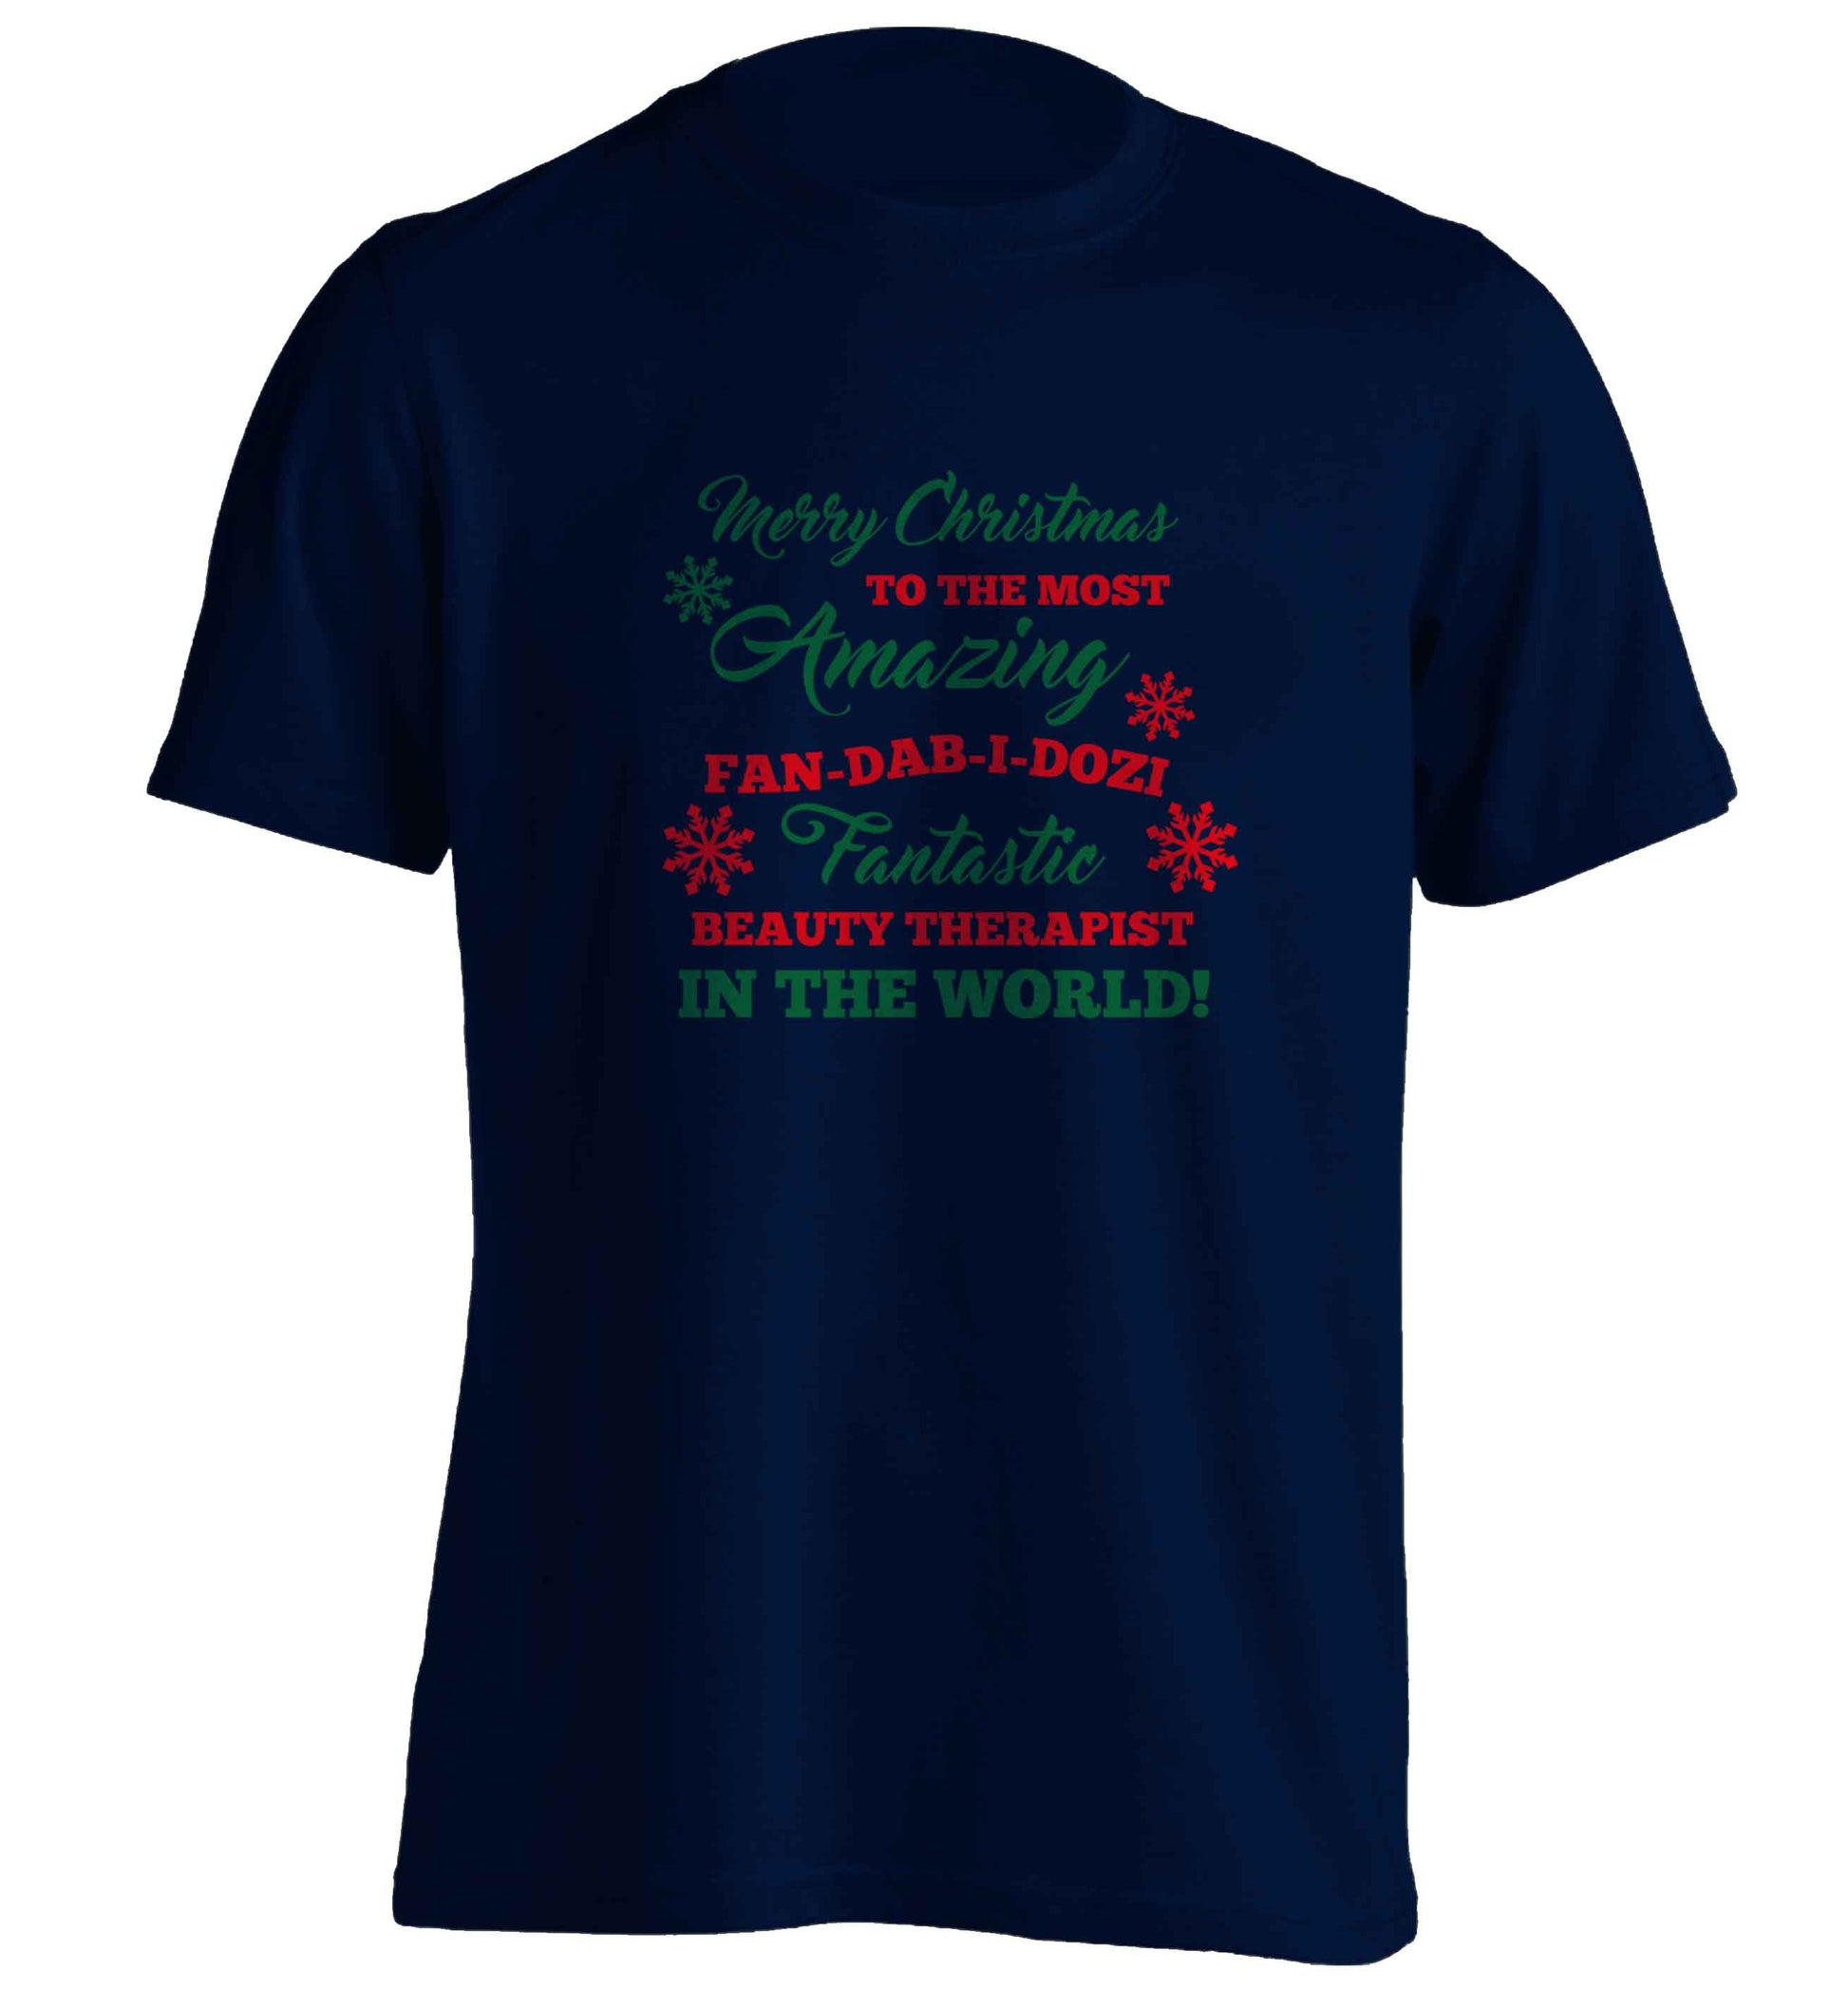 Merry Christmas to the most amazing fan-dab-i-dozi fantasic beauty therapist in the world adults unisex navy Tshirt 2XL